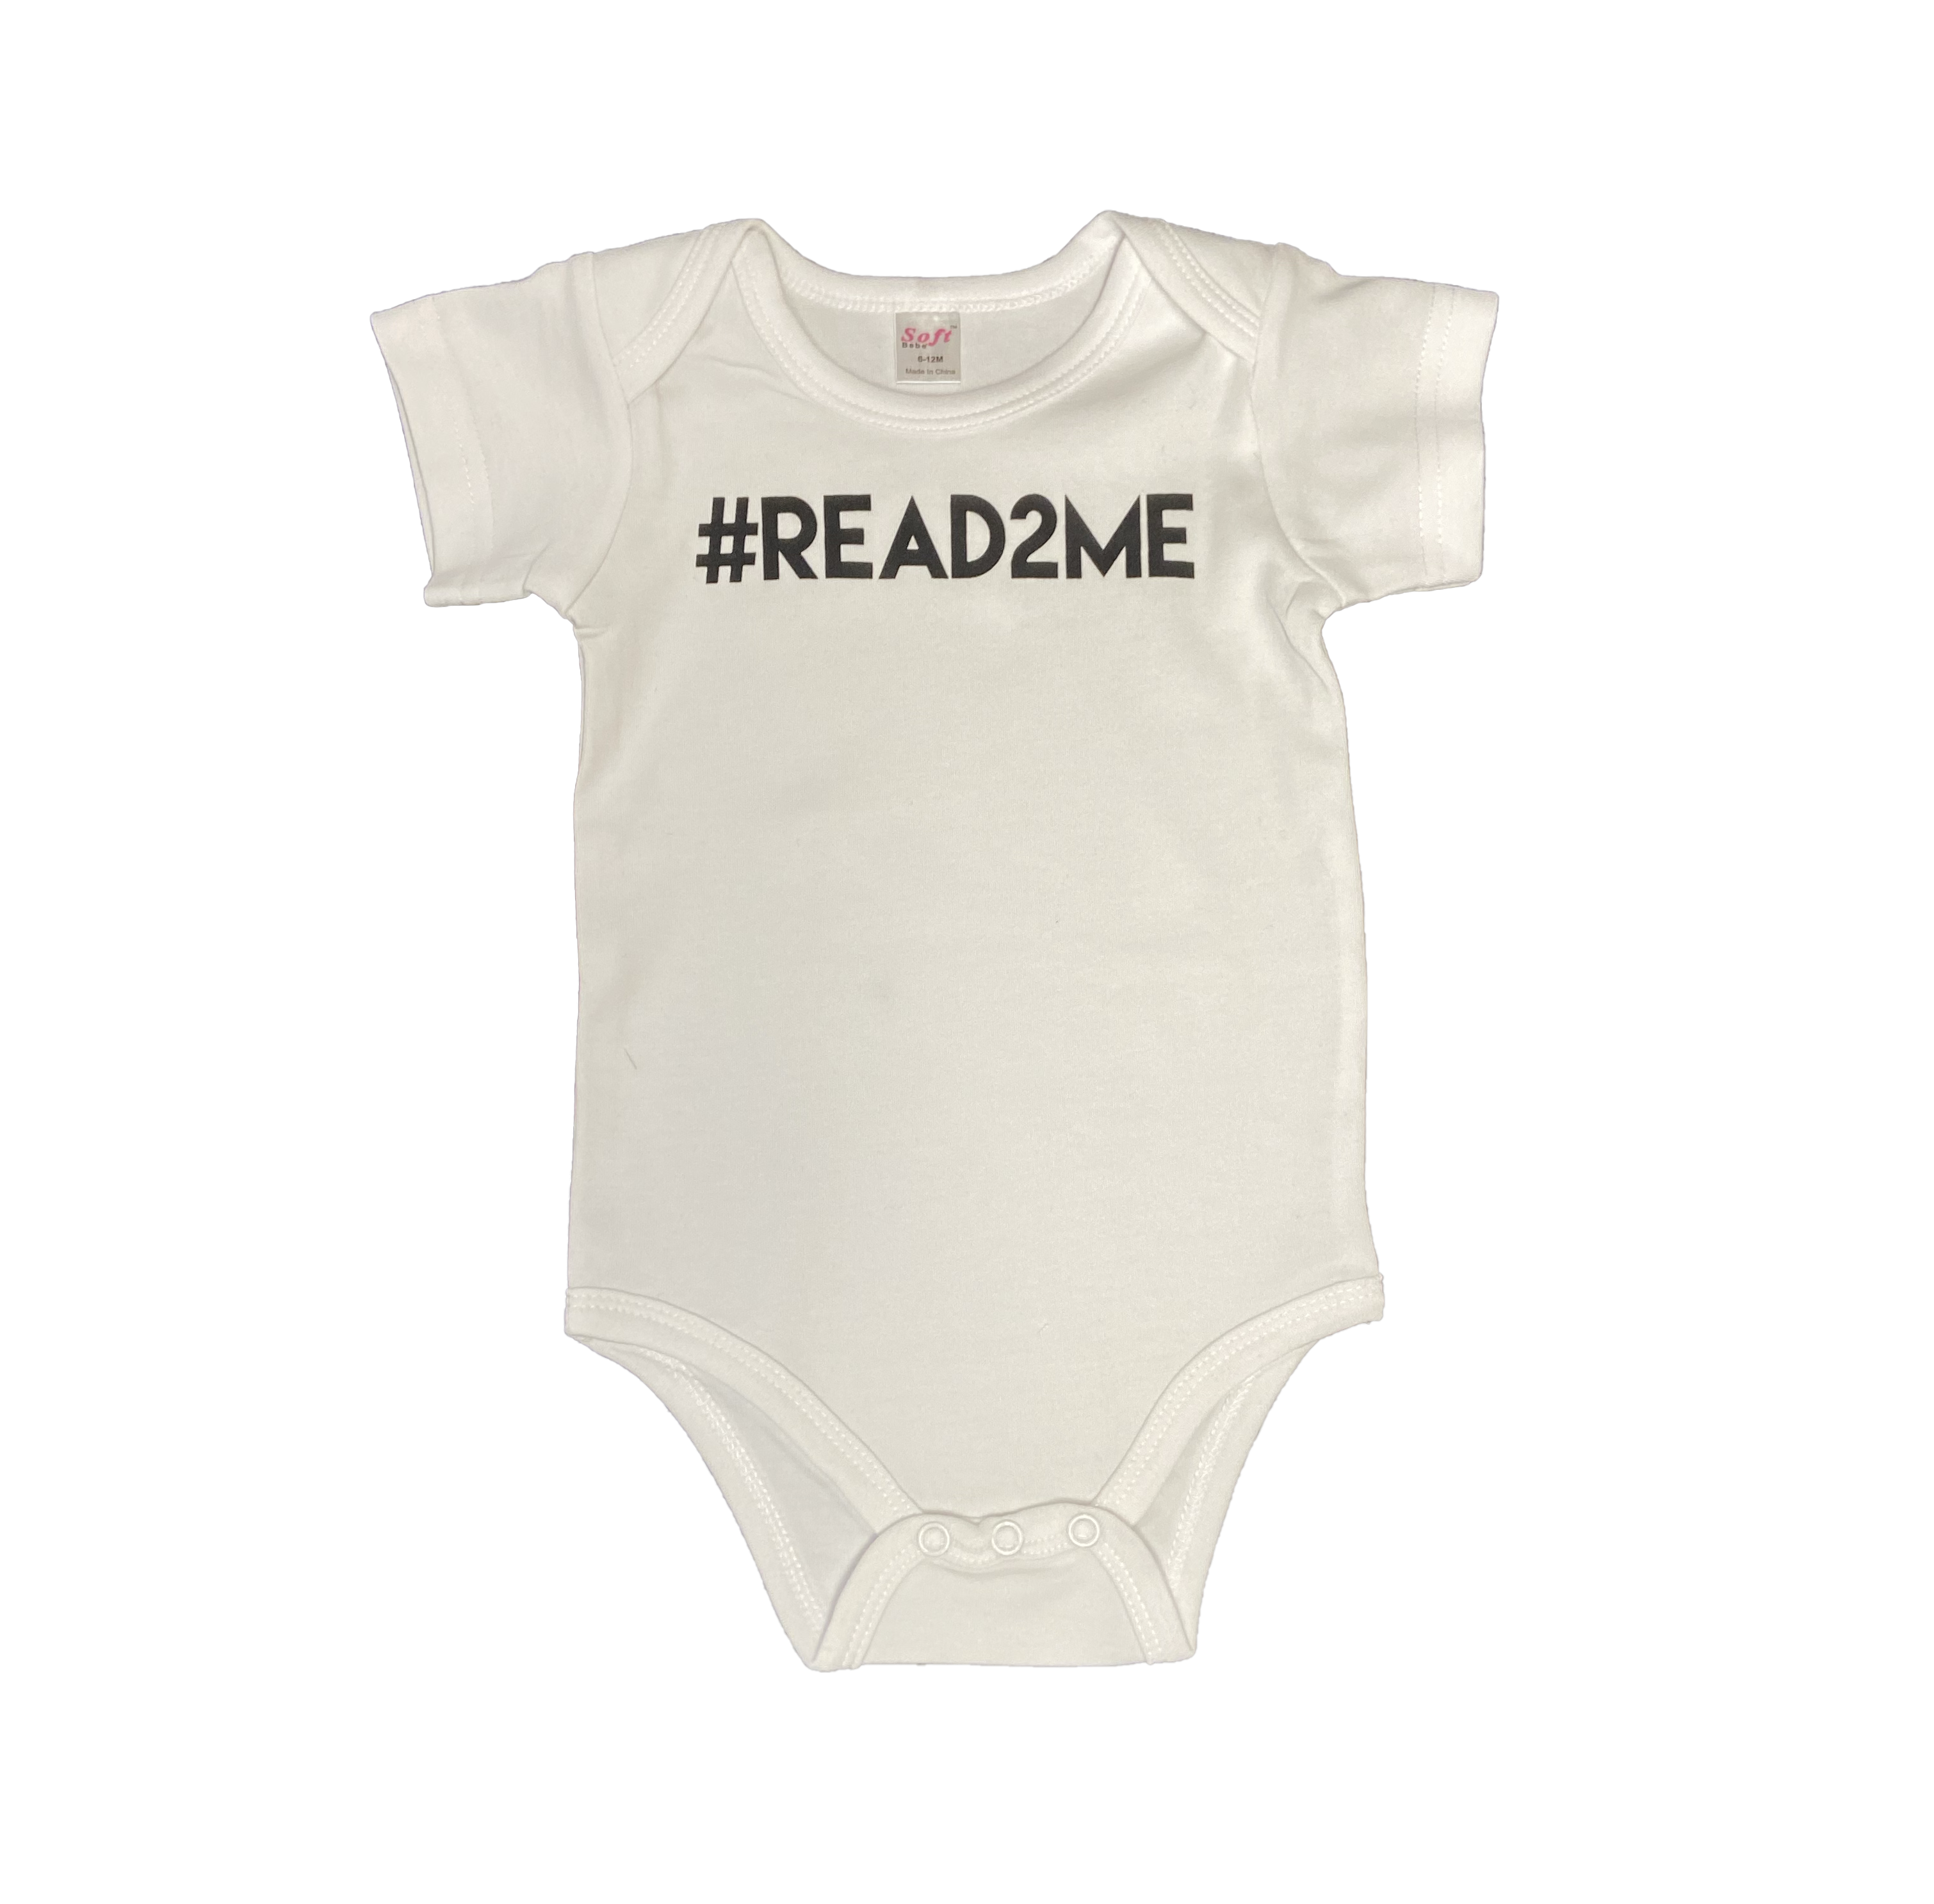 Bookish Endeavors Baby & Children's T-Shirts